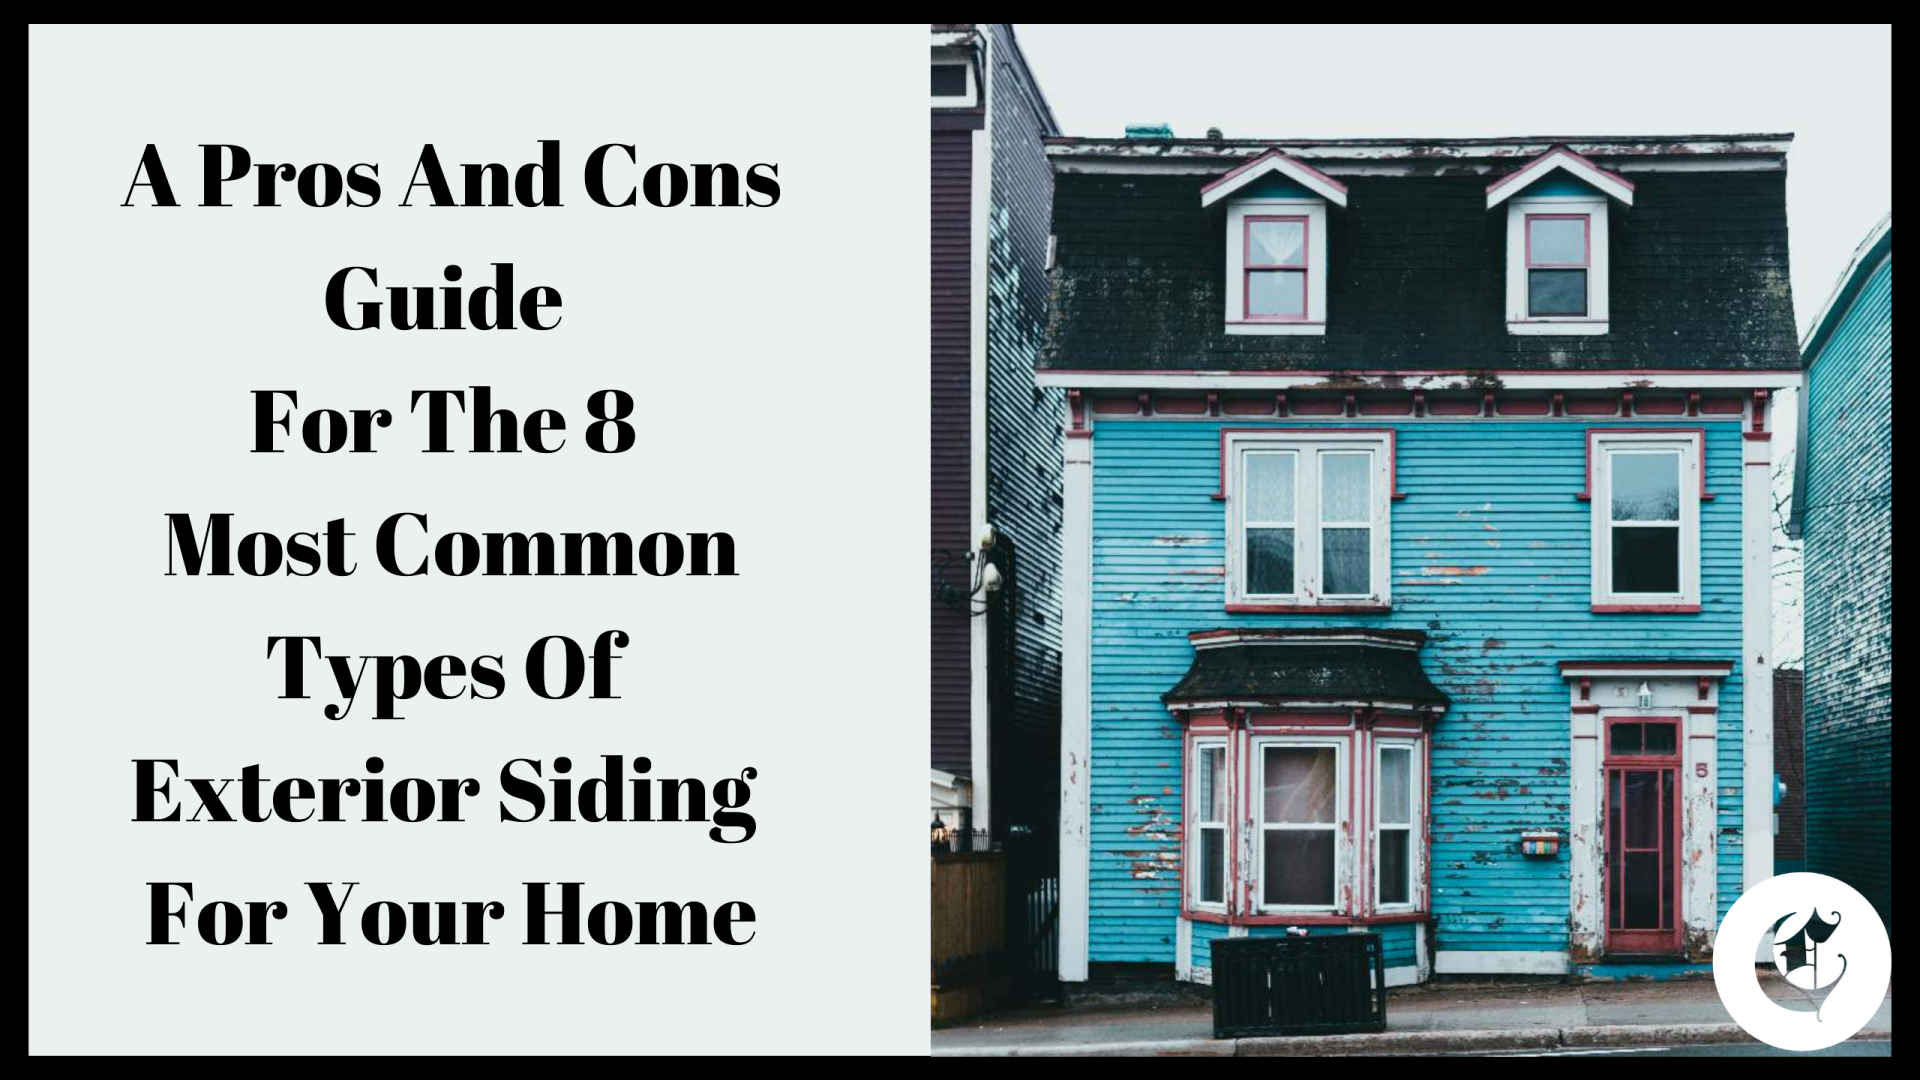 Pros and Cons Guide For The 8 Most Common Types of Siding, Best Siding For My House, Siding Installation, Exterior Remodeling Contractor, Beresford, Sioux Falls SD